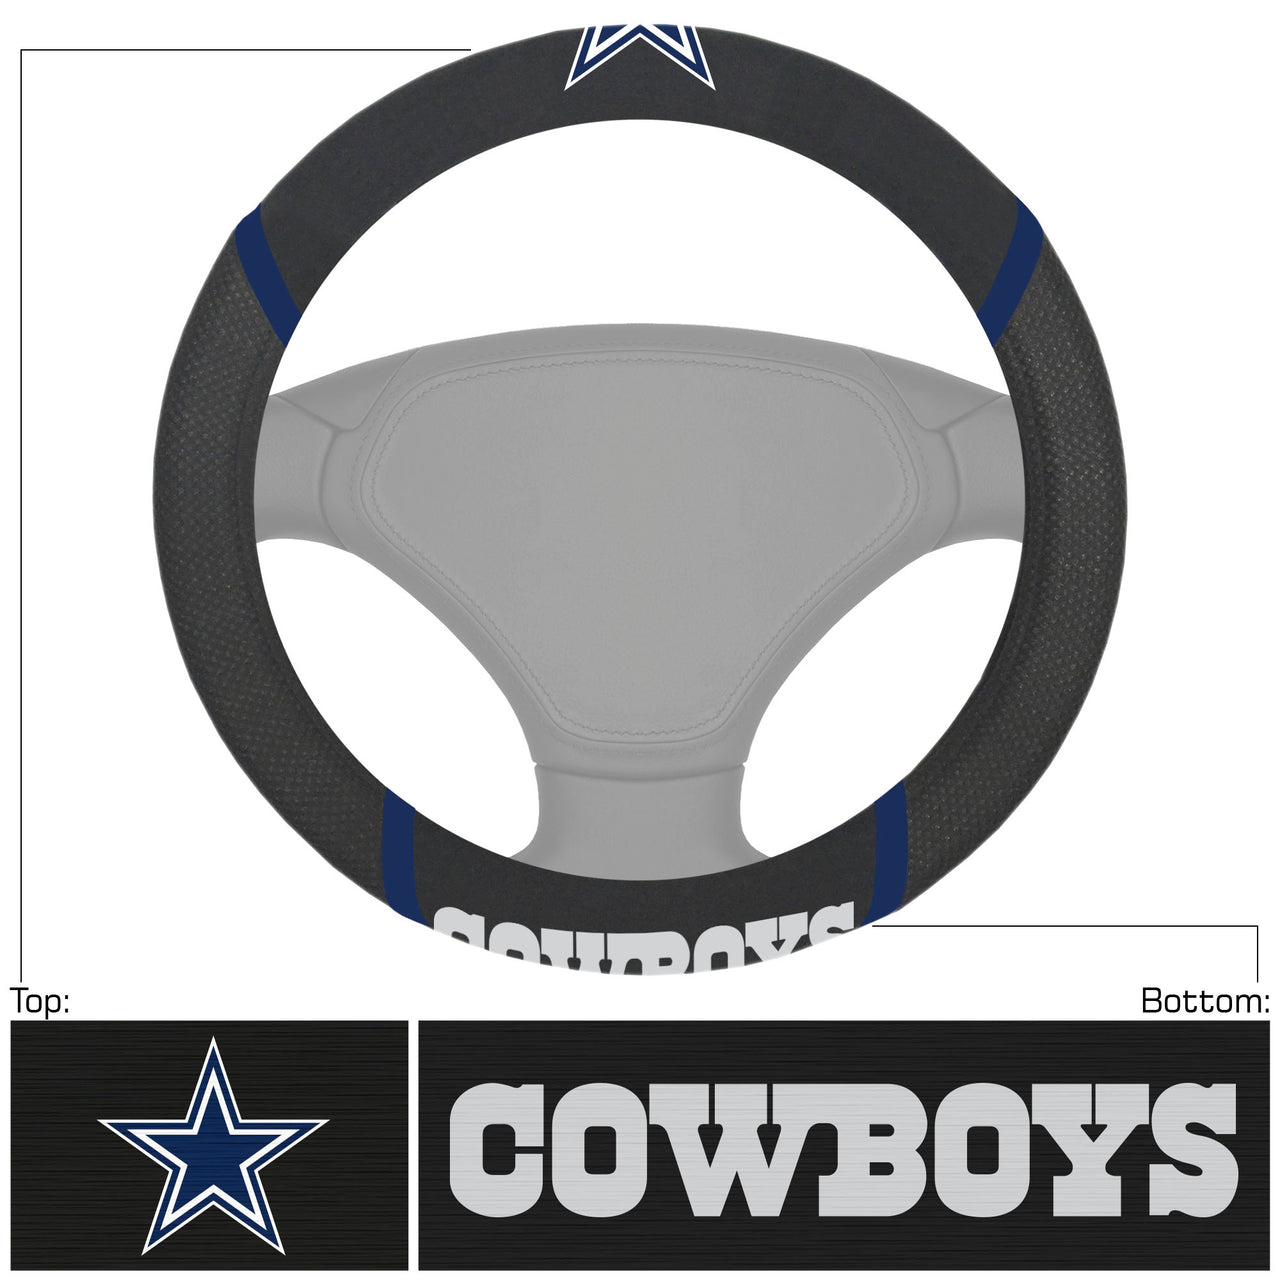 Dallas Cowboys NFL Football Deluxe Steering Wheel Cover - Dynasty Sports & Framing 